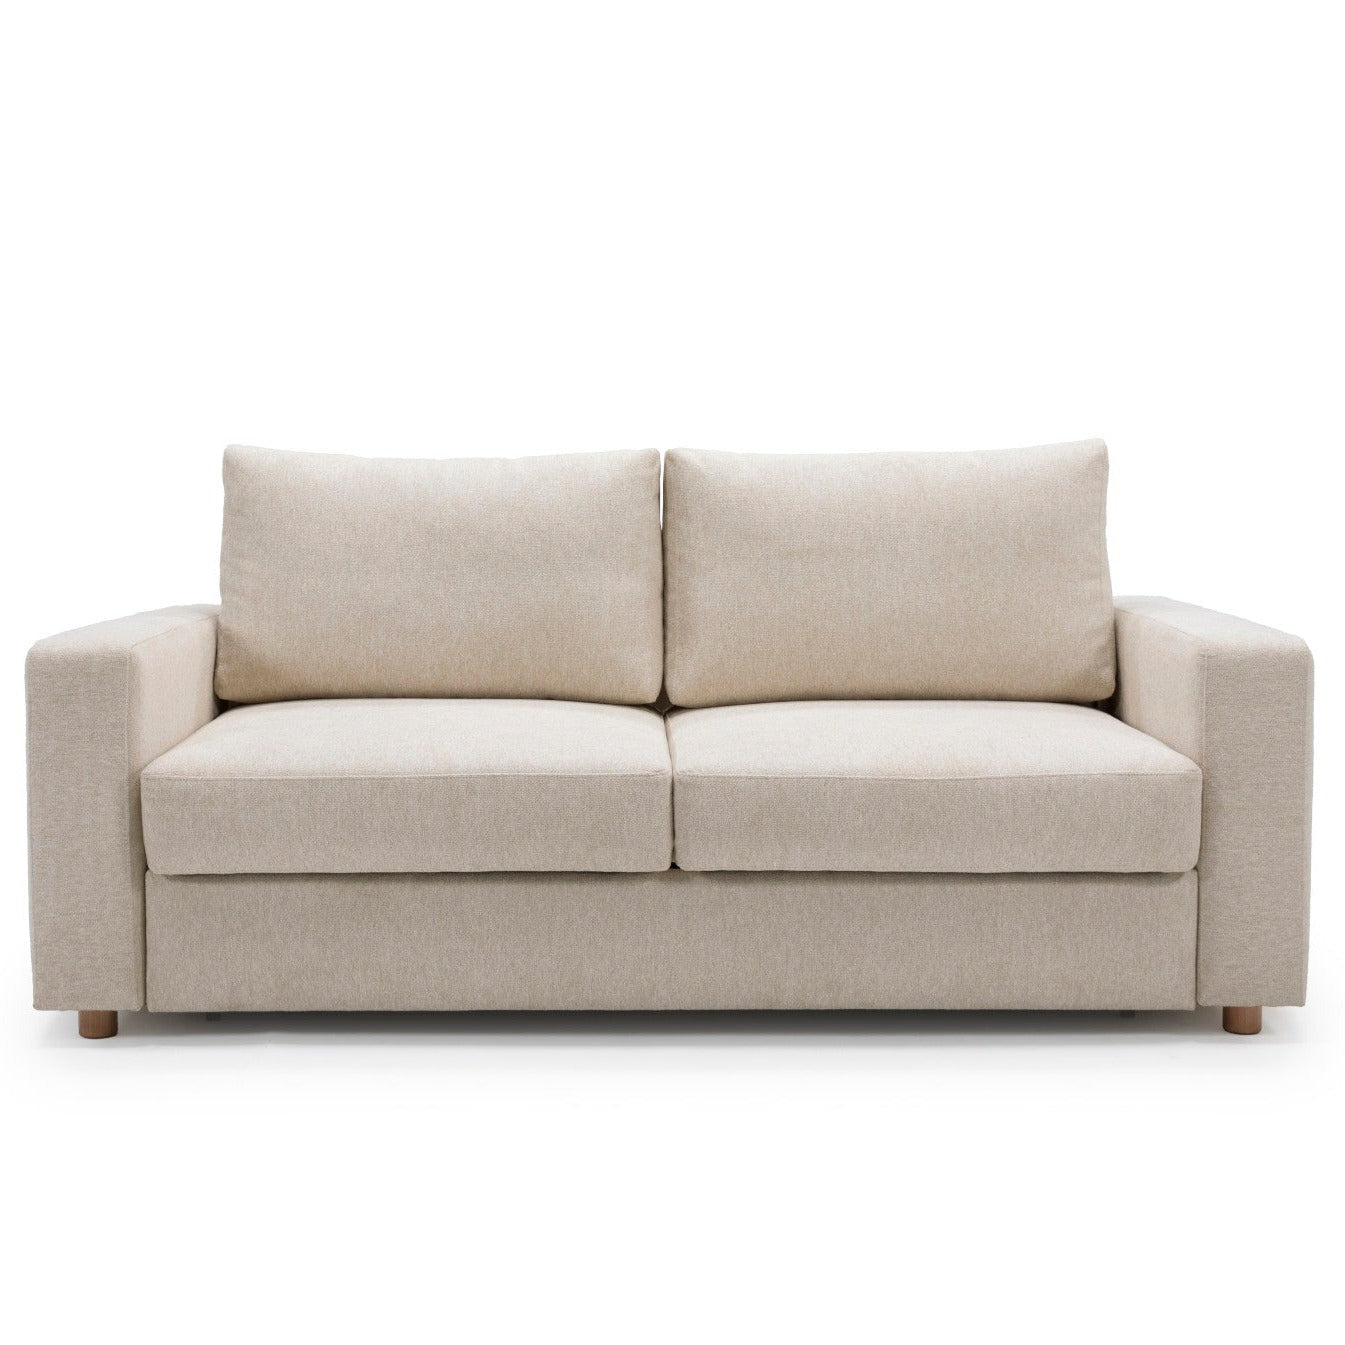 Innovation Living Neah Sofa Bed with Standard Arms